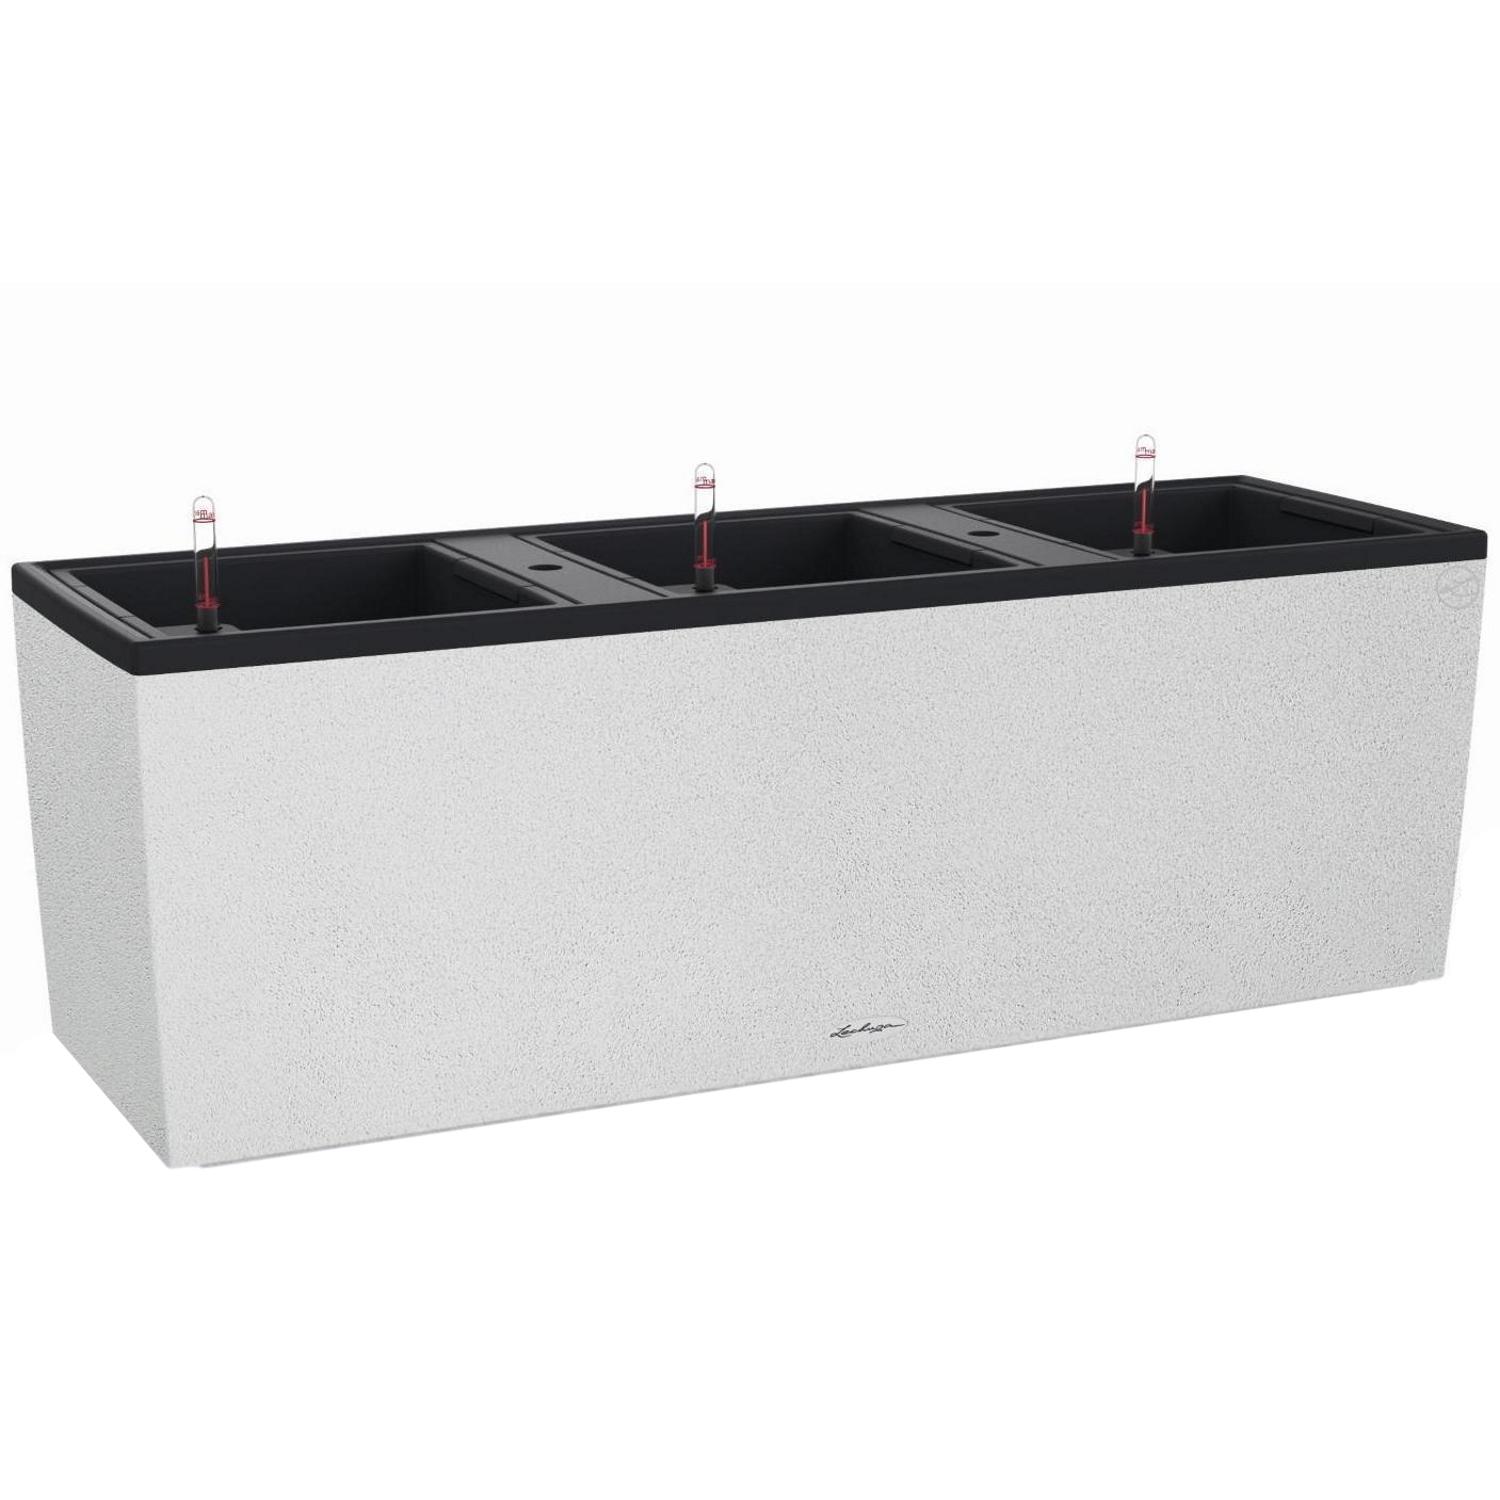 LECHUZA TRIO Stone 30 Poly Resin Floor Self-watering Planter with Substrate and Water Level Indicator - citiplants.com